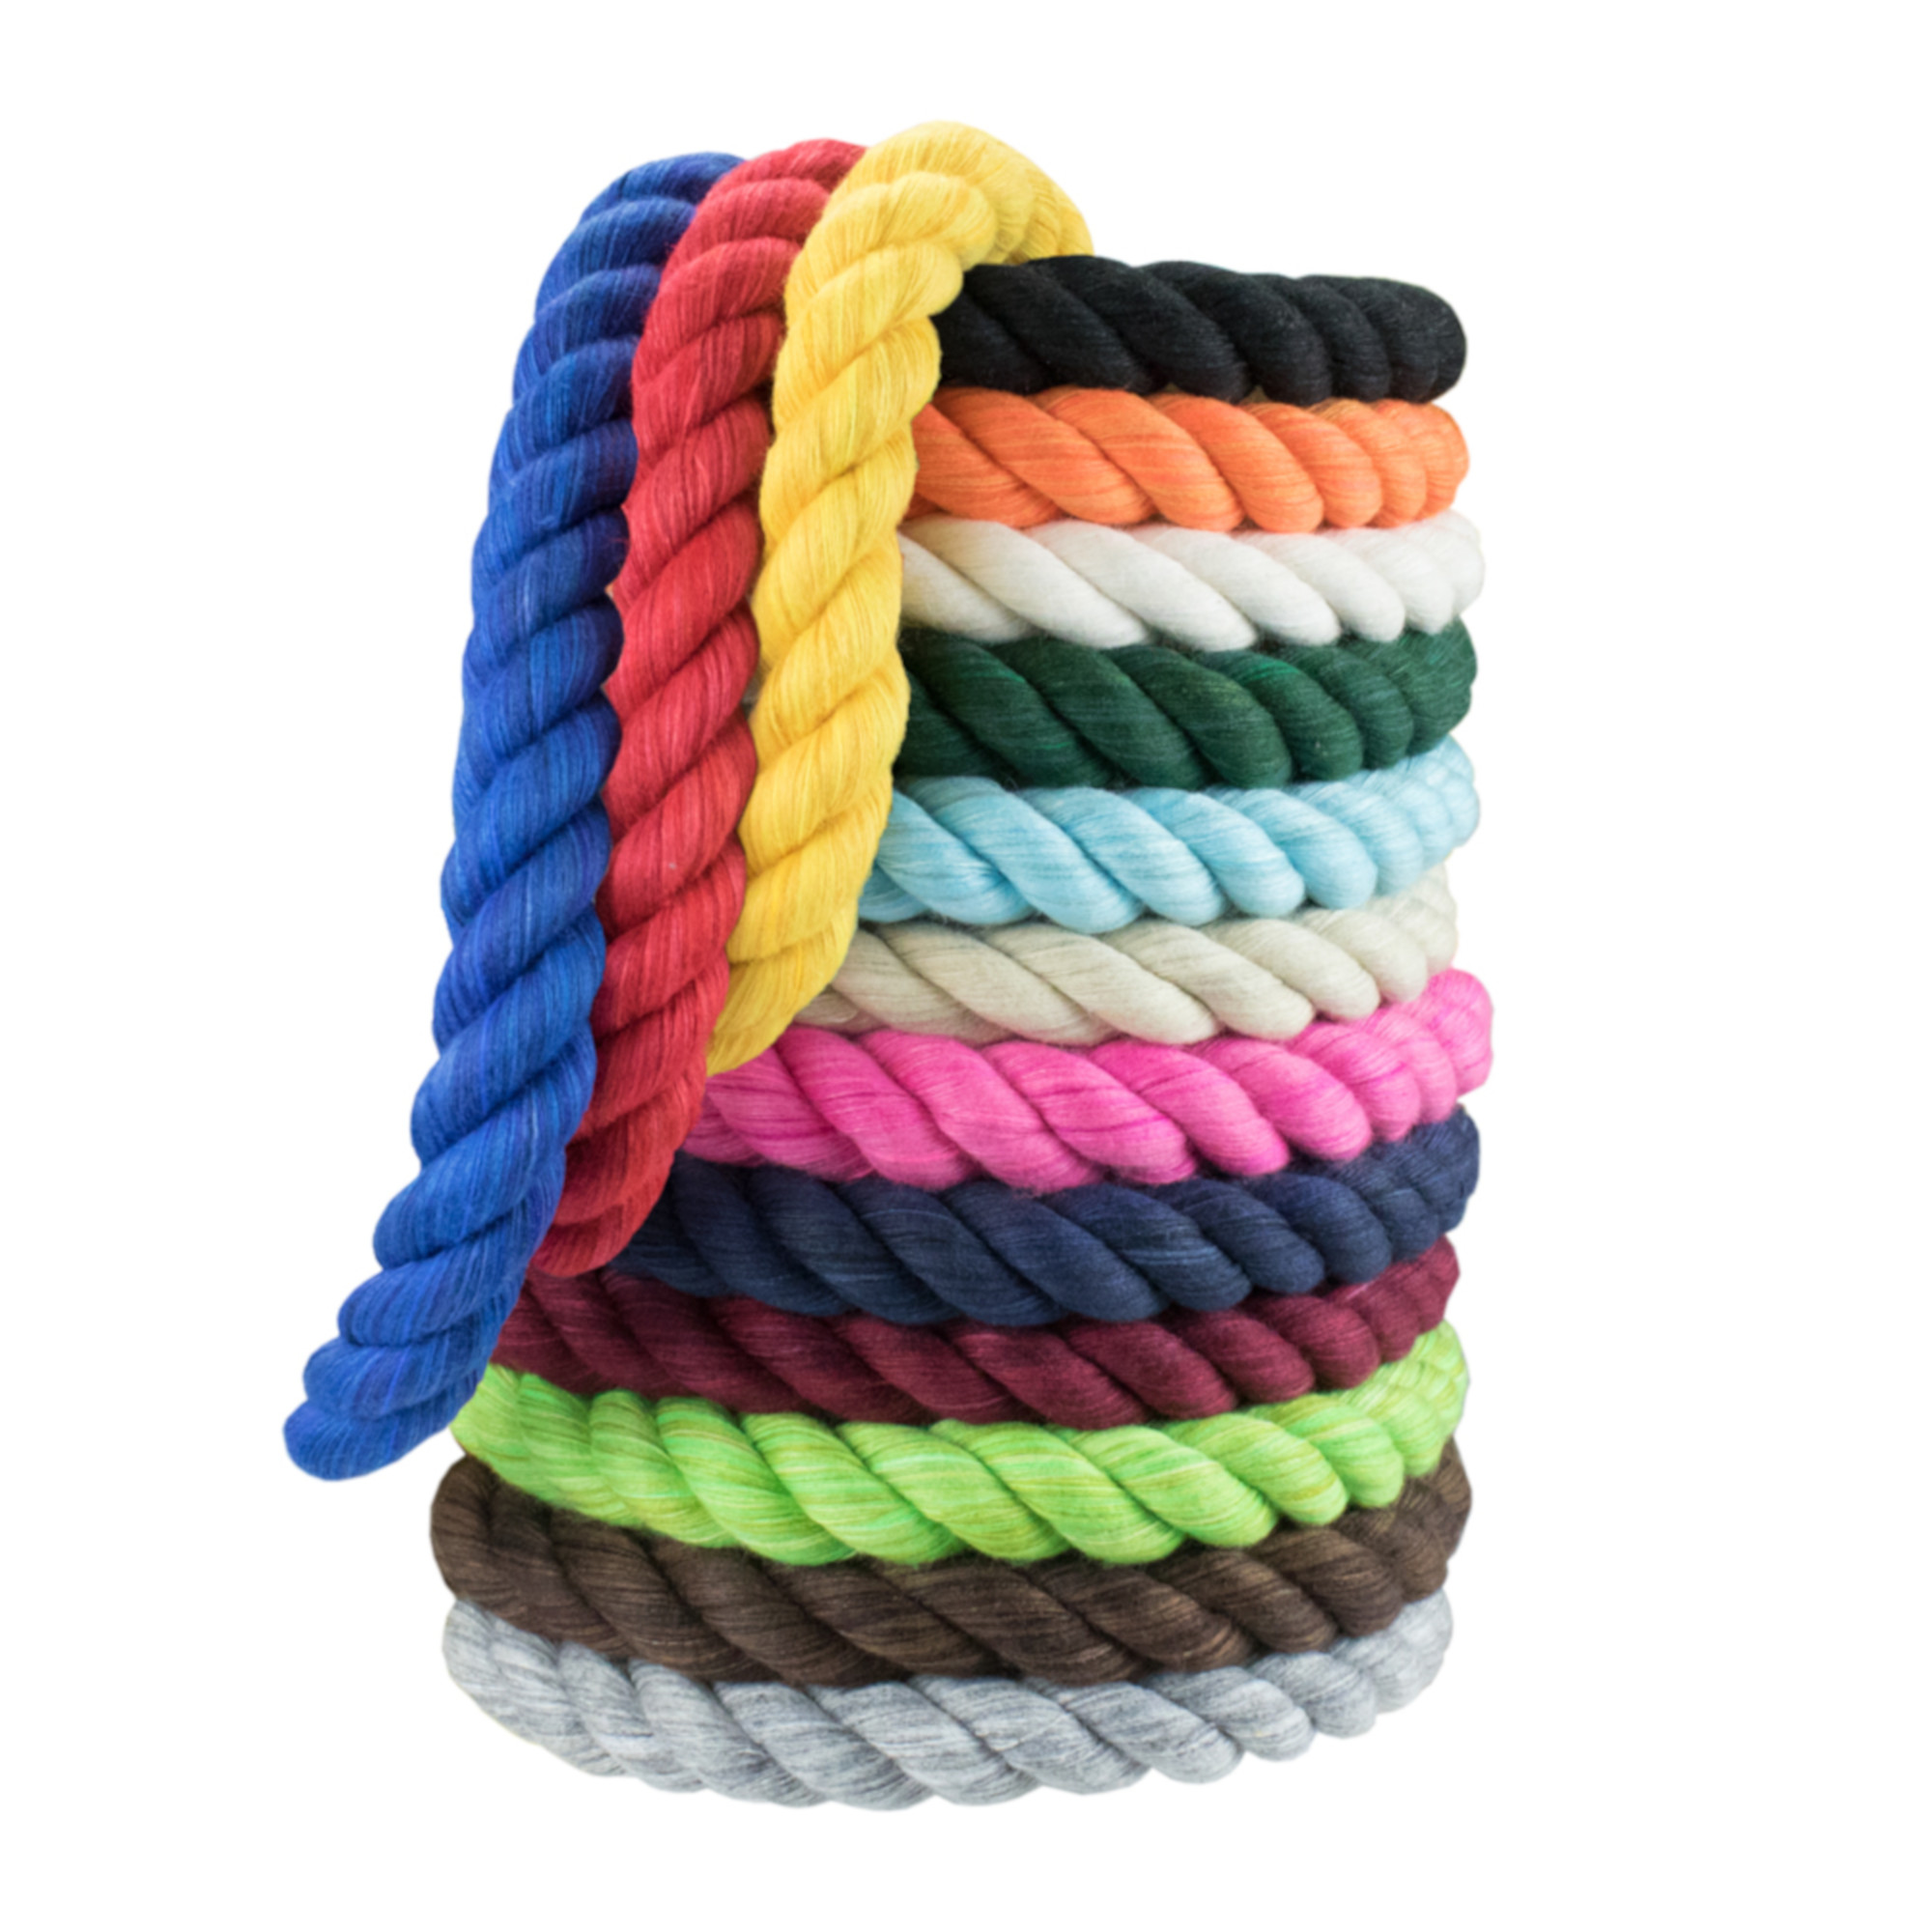 West Coast Paracord Natural Cotton Rope 1/2 Inch Twisted Soft Rope by the Foot in 25 Feet, 50 Feet, 100 Feet, and 600 Feet. Pet Safe and USA Made - image 2 of 4